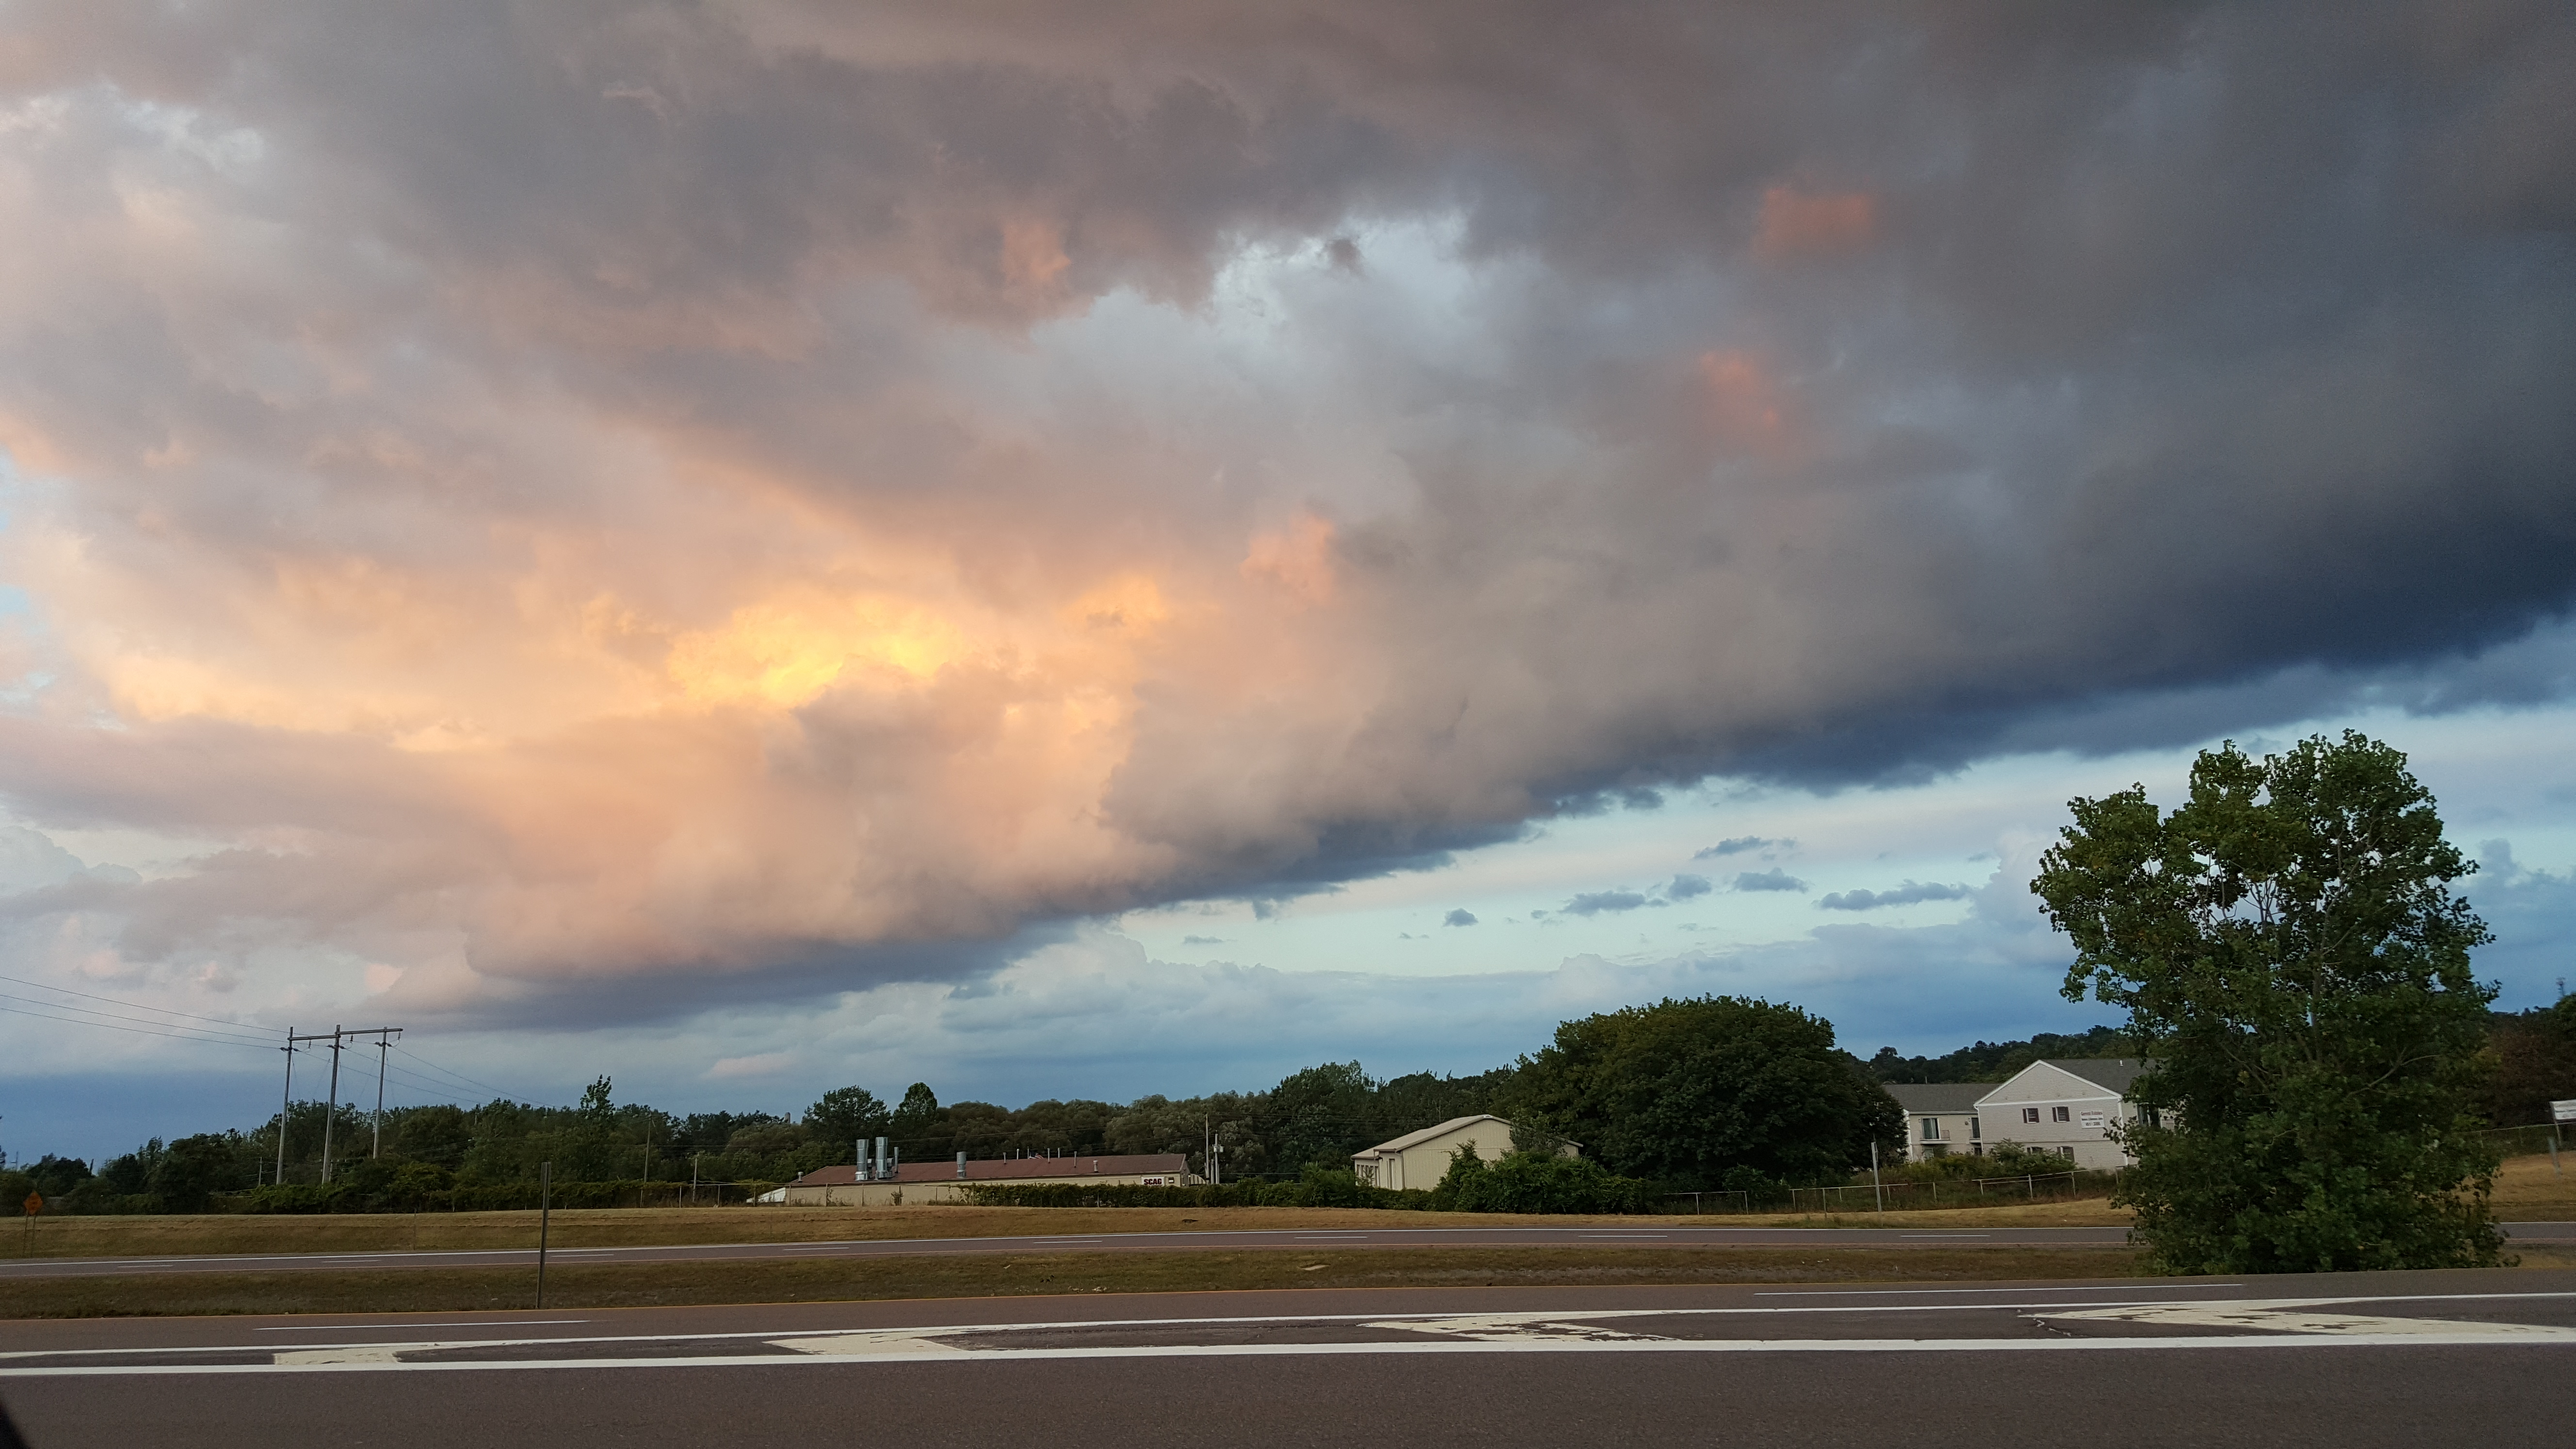 Evening Storm Clouds 7, Clouds, Evening, Road, Sky, HQ Photo